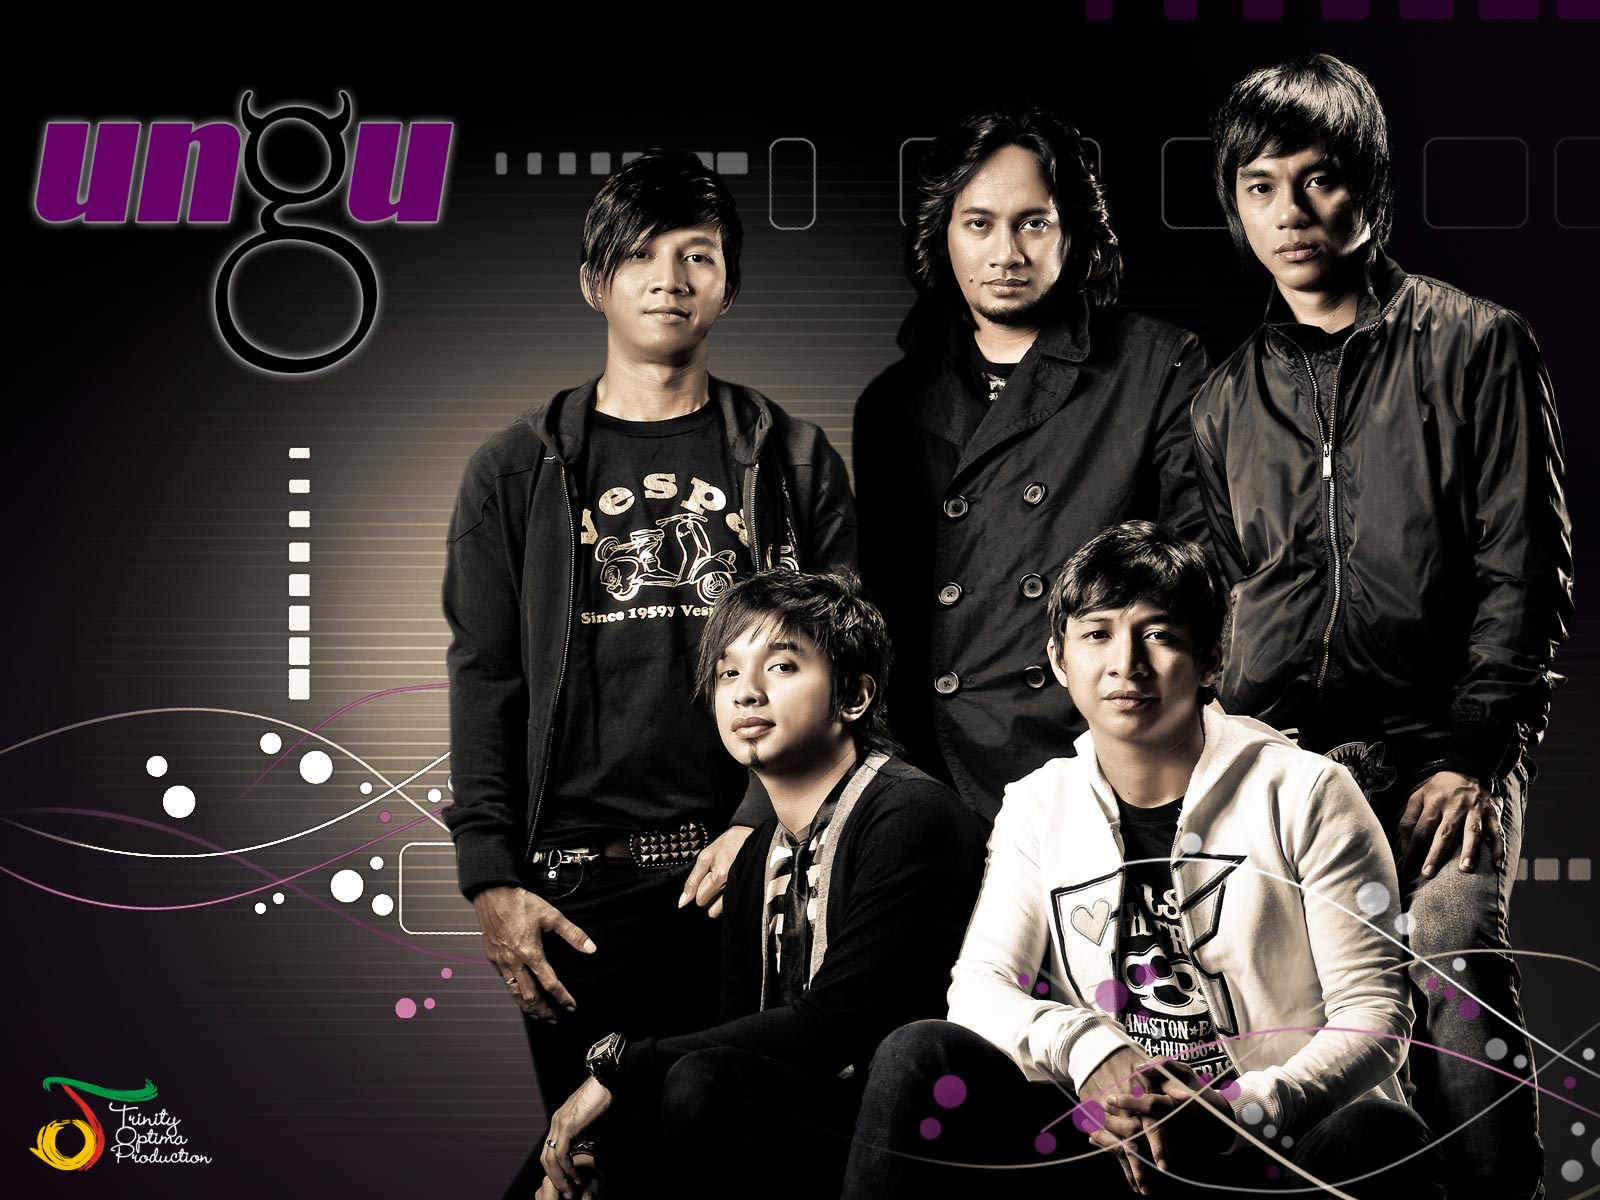 wallpapers hd for mac: Ungu Band Wallpapers